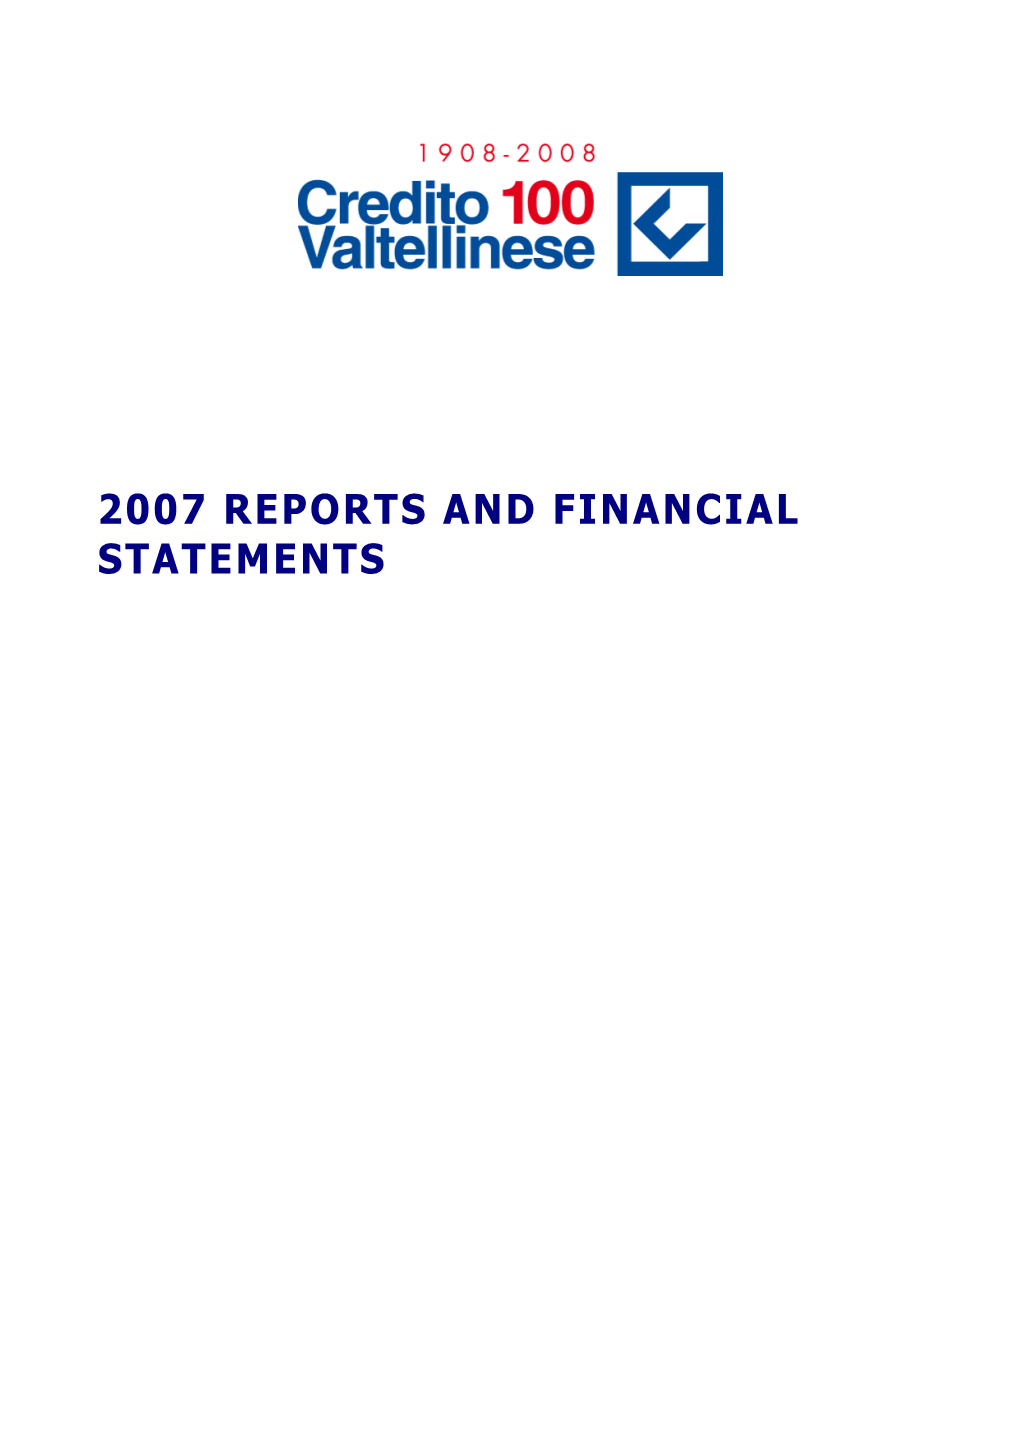 2007 Reports and Financial Statements